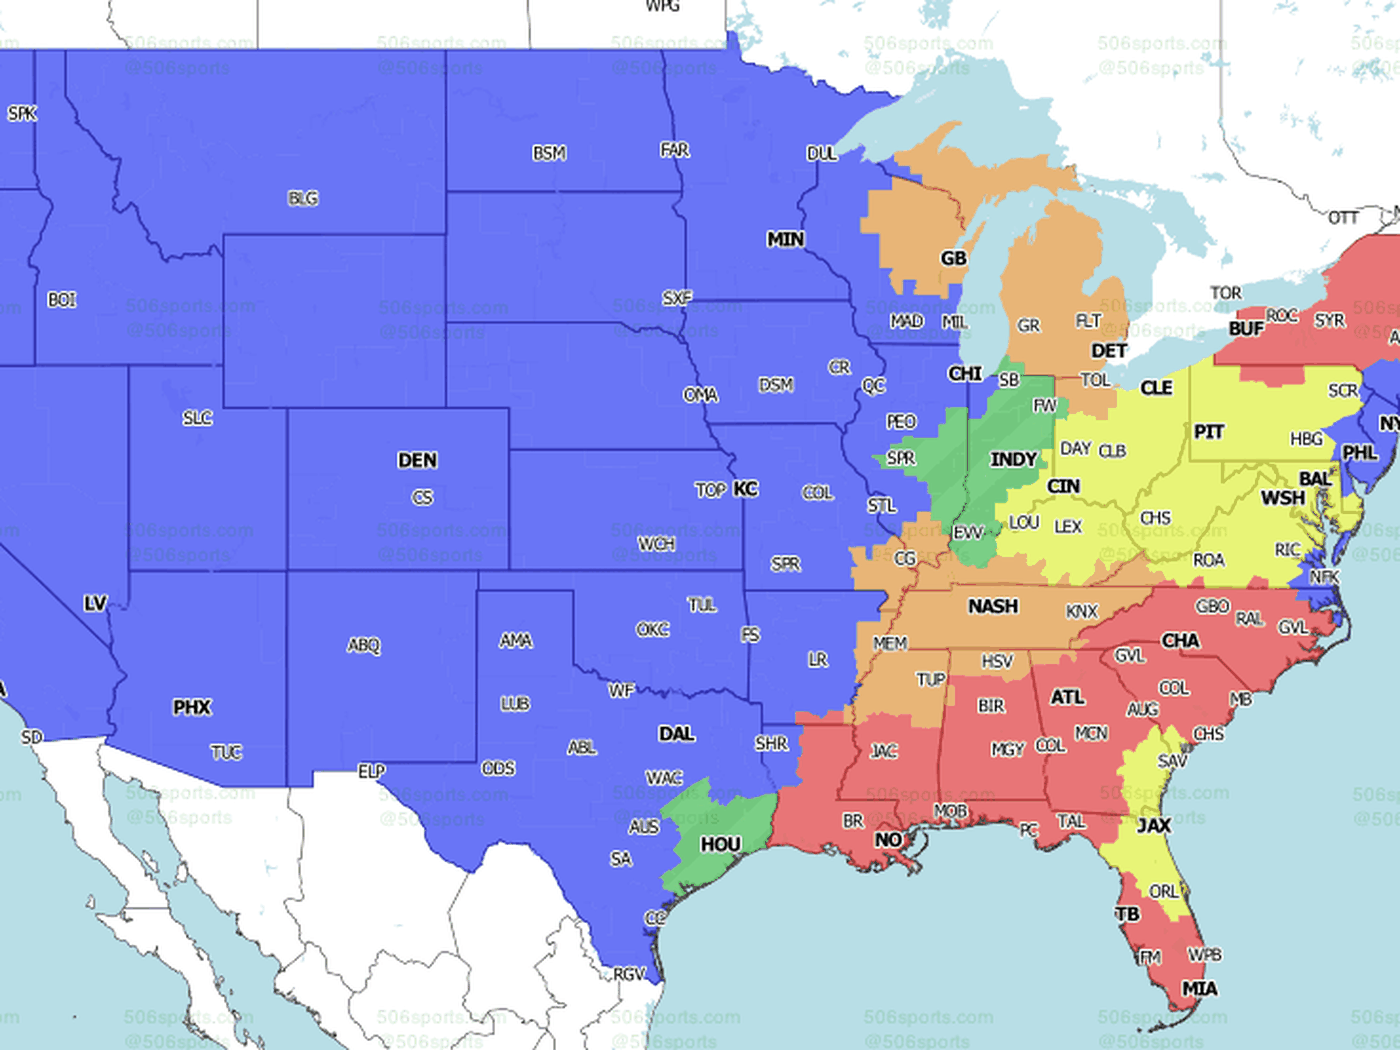 NFL Week 15 National TV Maps: Which games will you get on Sunday? -  Baltimore Beatdown